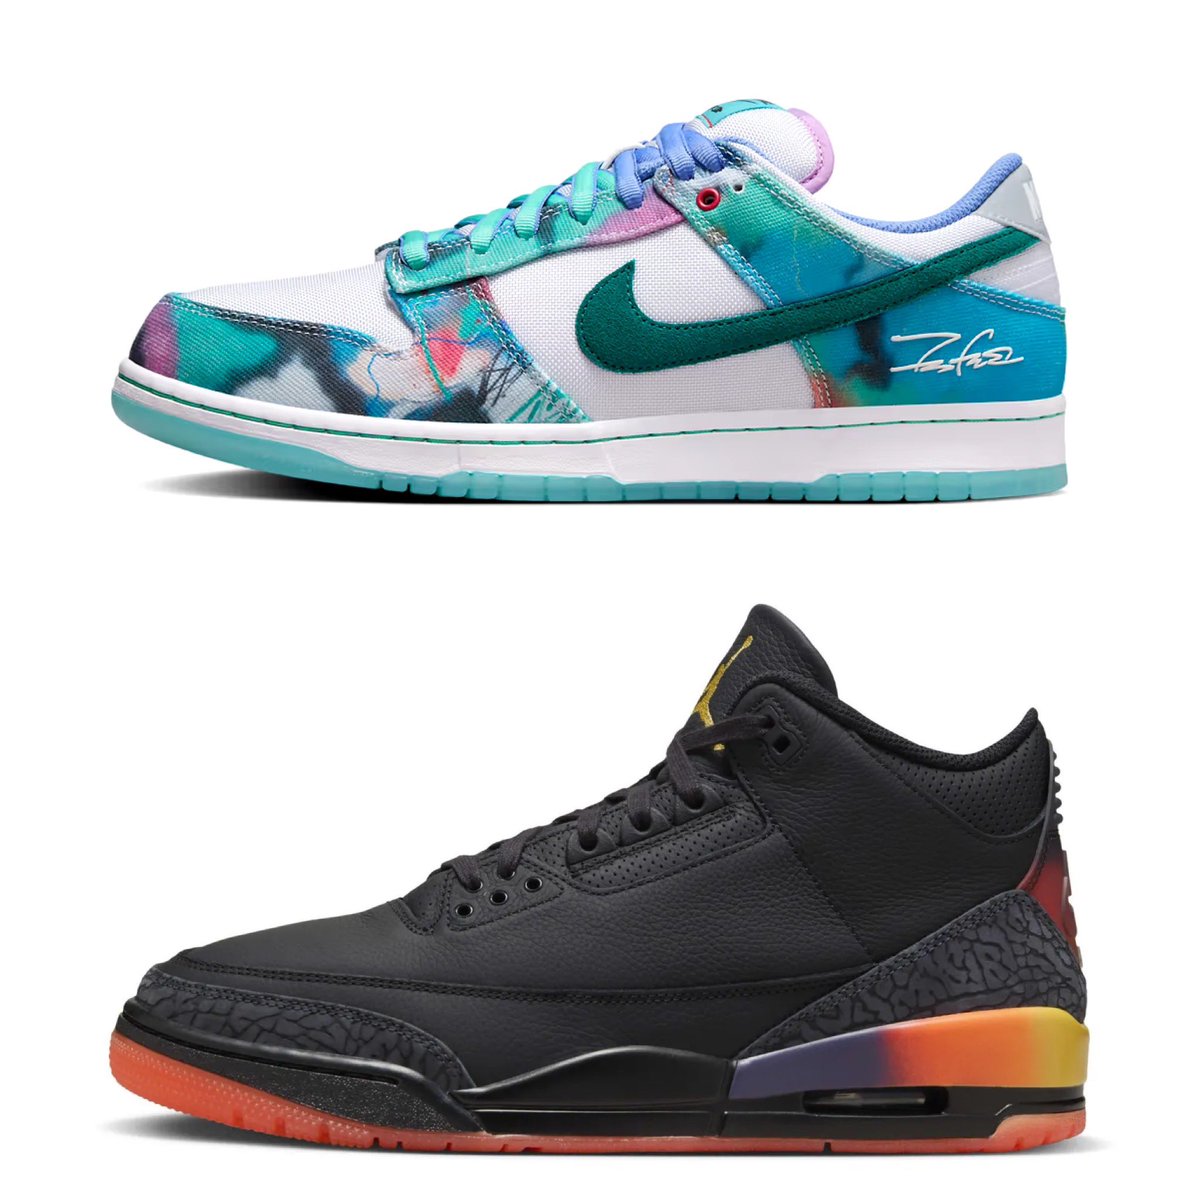 Both dropping on SNKRS on May 22 👀 

Which pair are you hoping to catch a W on?